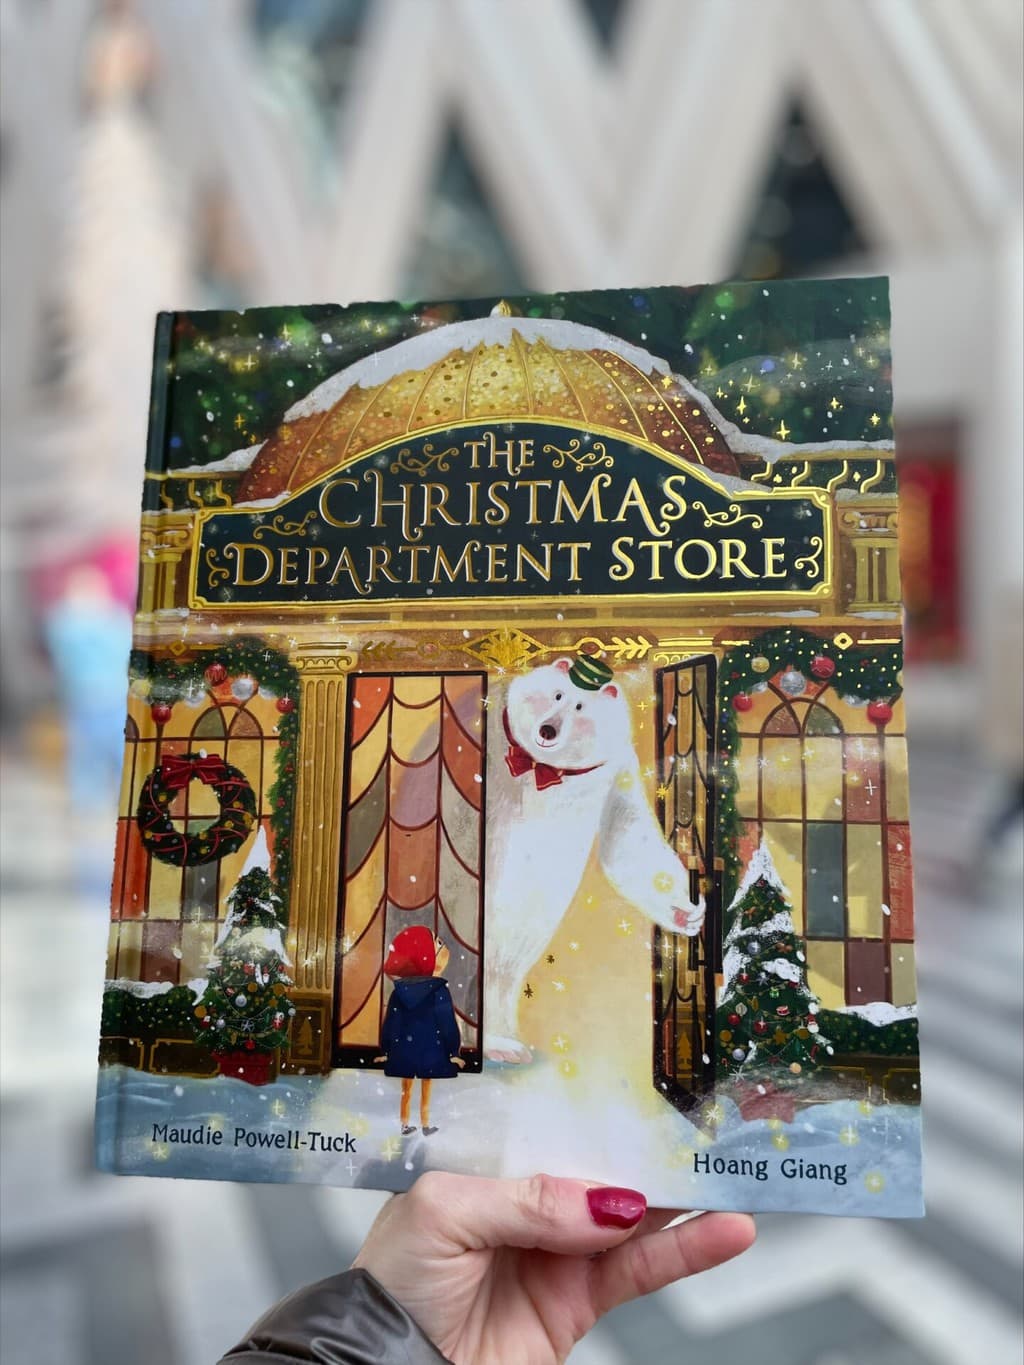 The Christmas Department Store – Maudie Powell-Tuck (author), Hoang Giang (illustrator), Little Tiger Press Ltd (publisher)